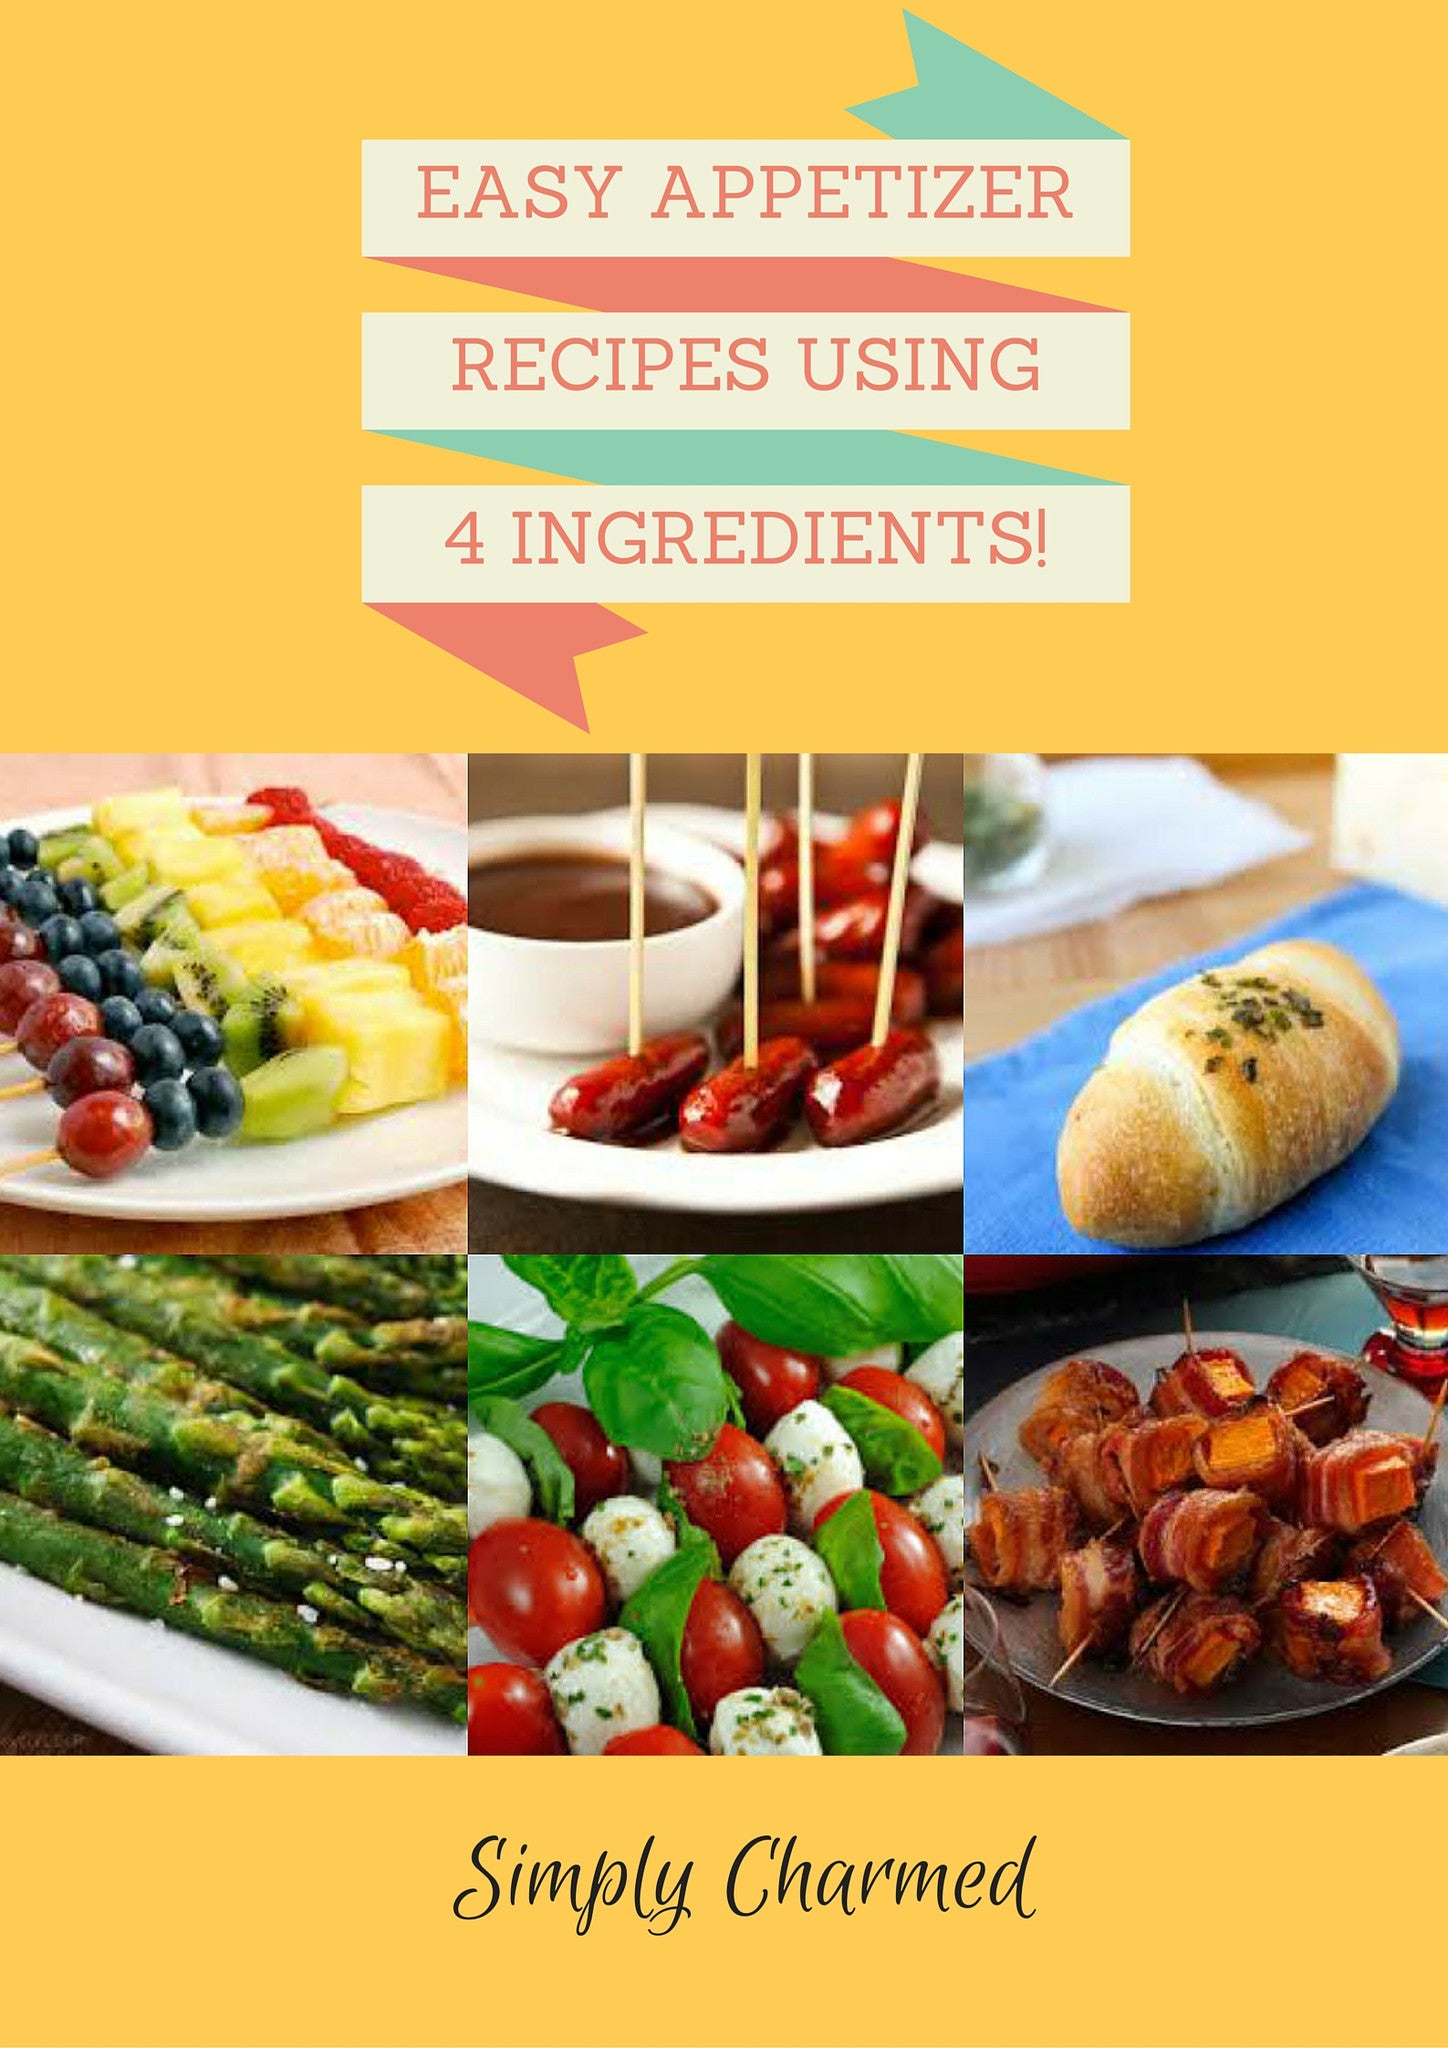 10 Easy Appetizer Recipes Using only 4 Ingredients You can Take to any Party!